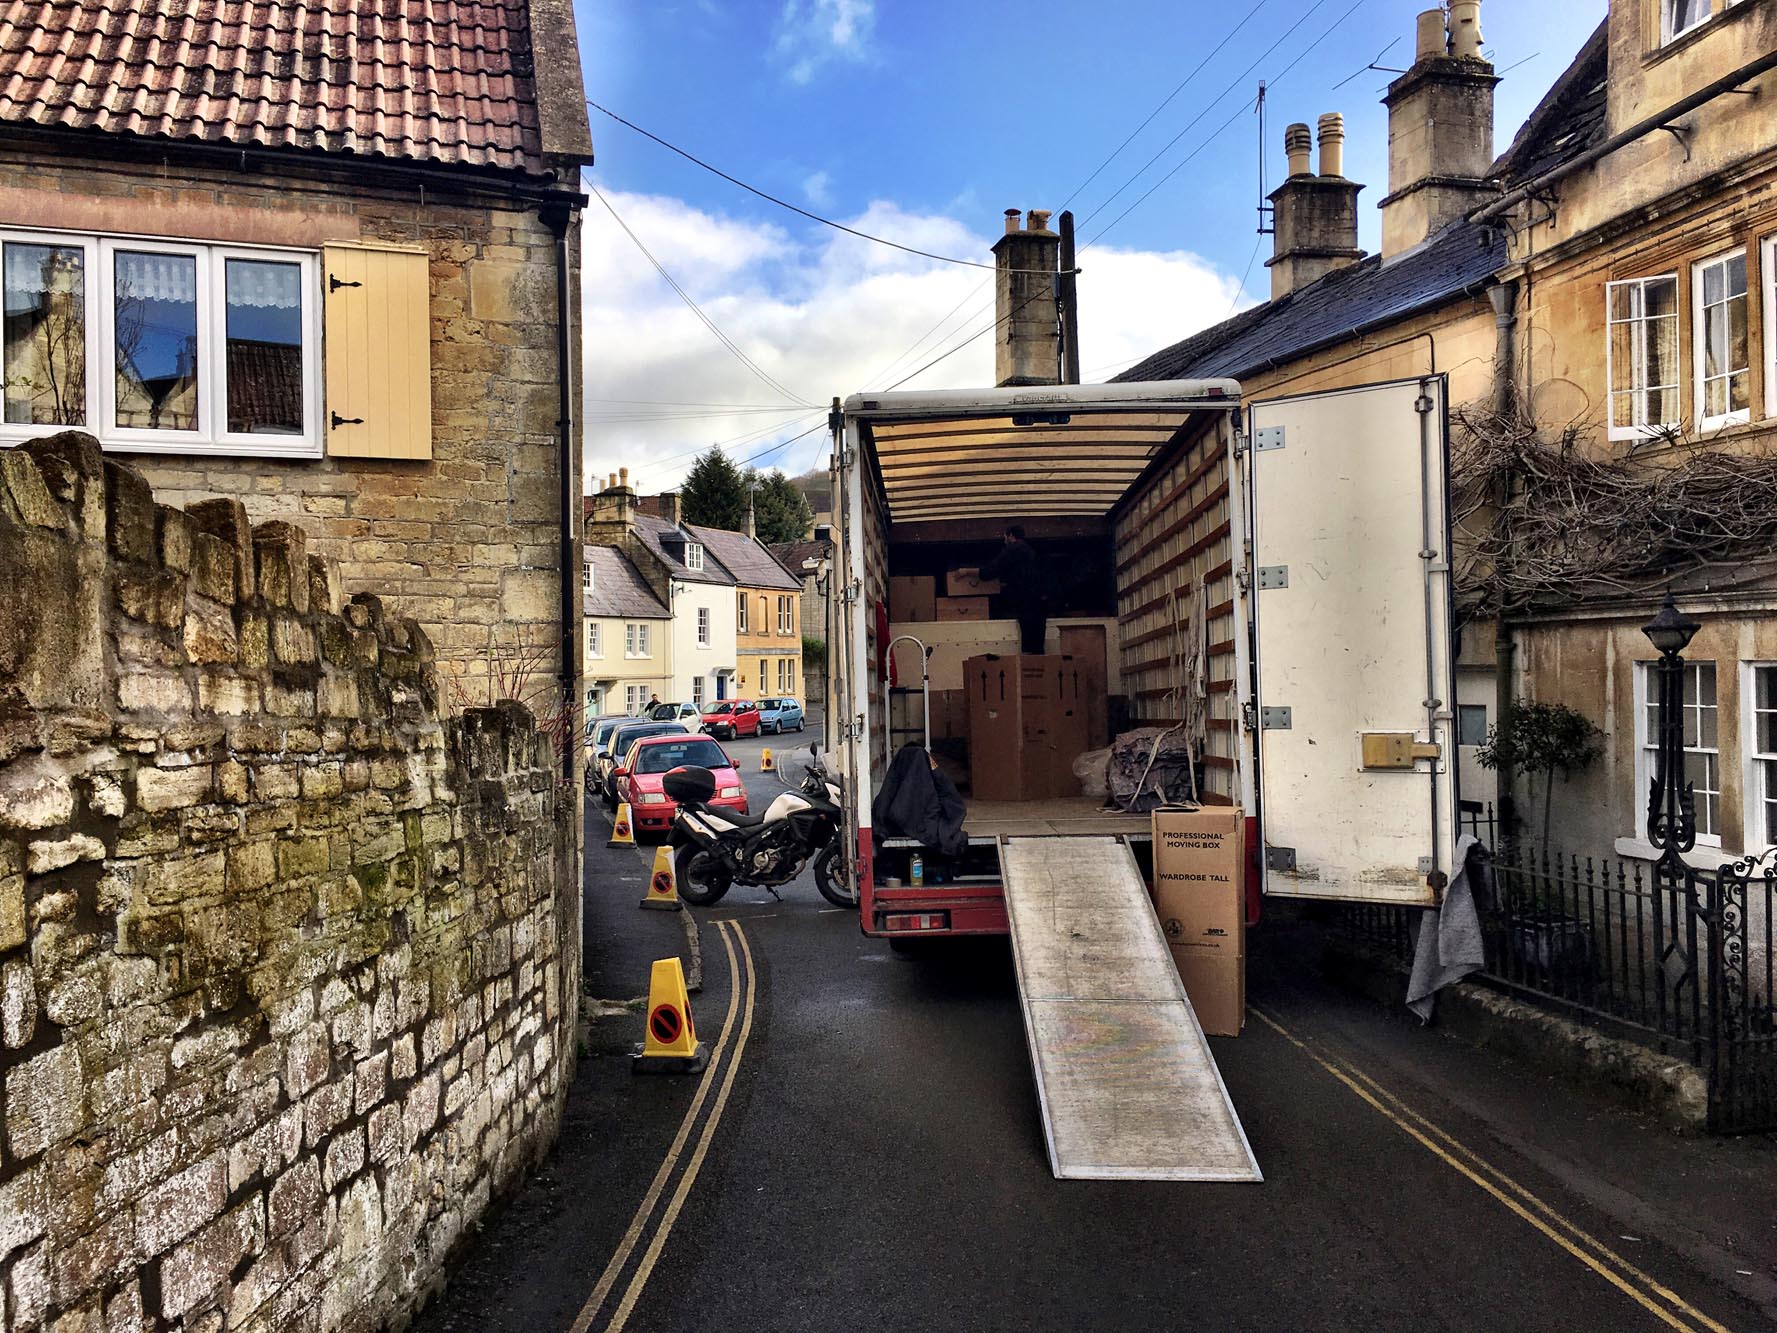   House &amp; Office Removals Across Wiltshire &amp; Somerset  